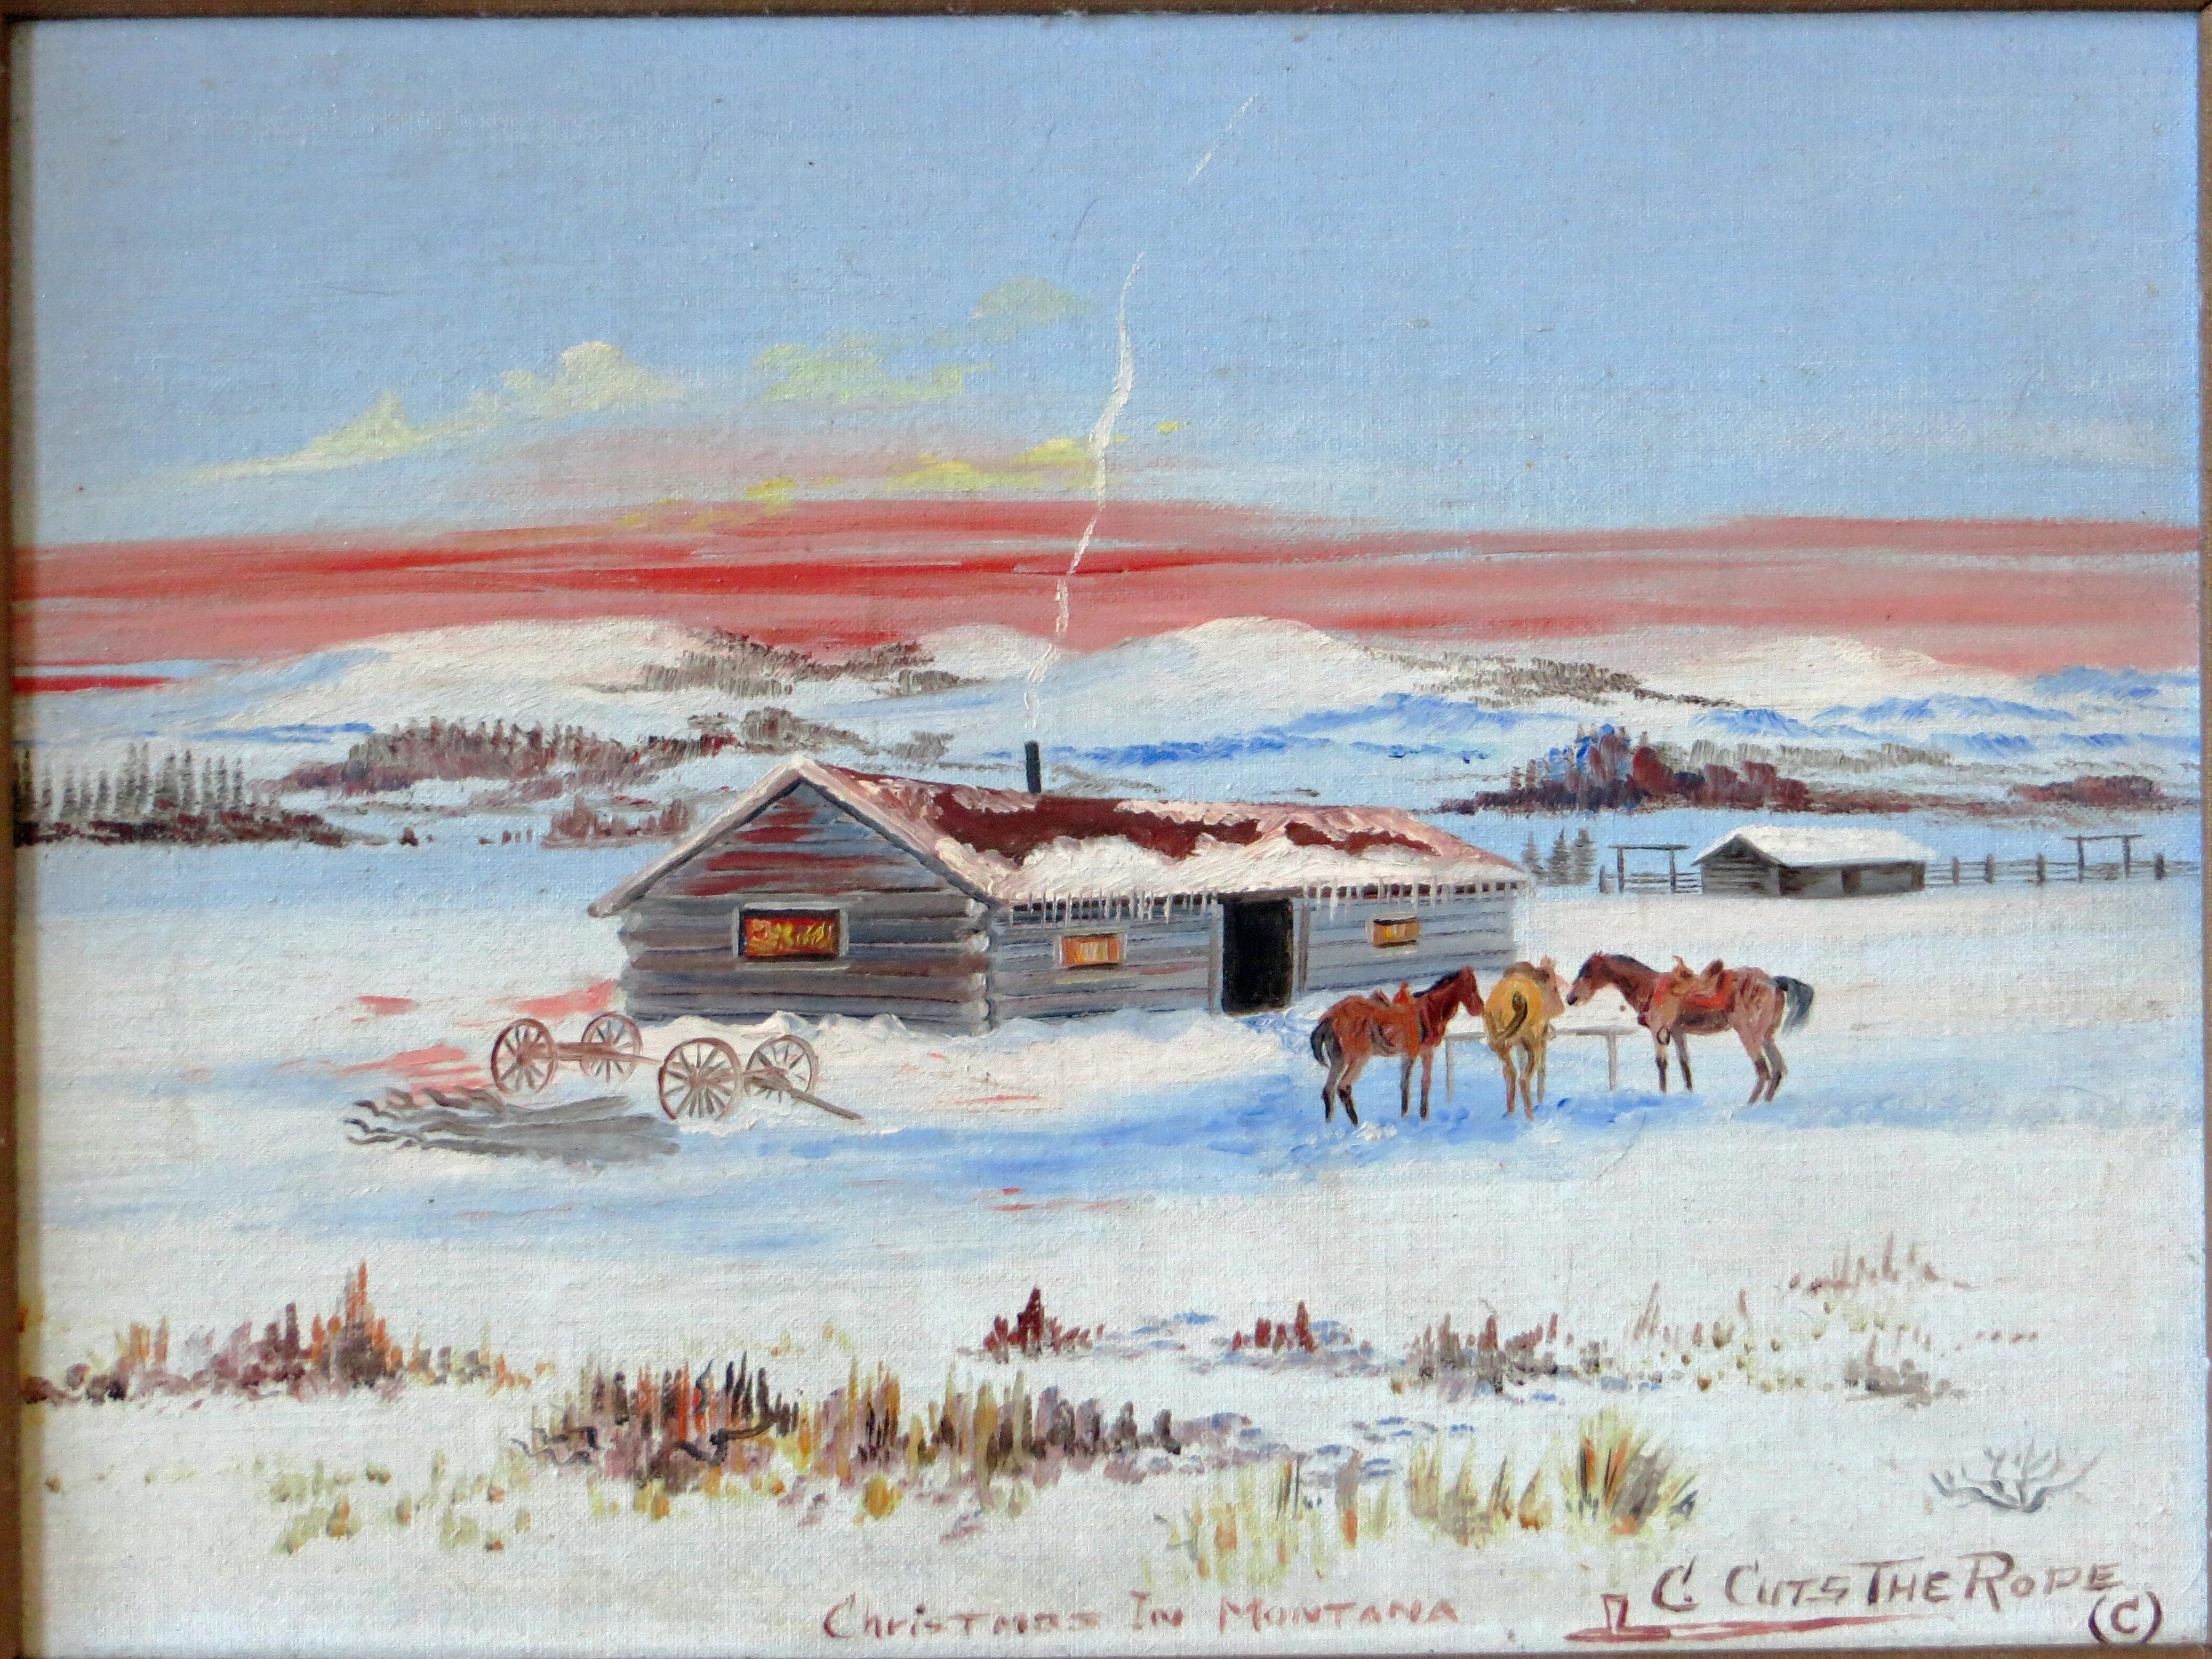 Artist: Clarence Cuts the Rope – Native American (1935-2000)
Title: Christmas in Montana
Year:  Circa 1970
Medium: Oil on board
Size: 11.5 x 15.5 inches (29 x 39 cm)
Framed Size: 16 x 20 inches (41 x 51cm)
Signature: Signed lower right
Title:  lower